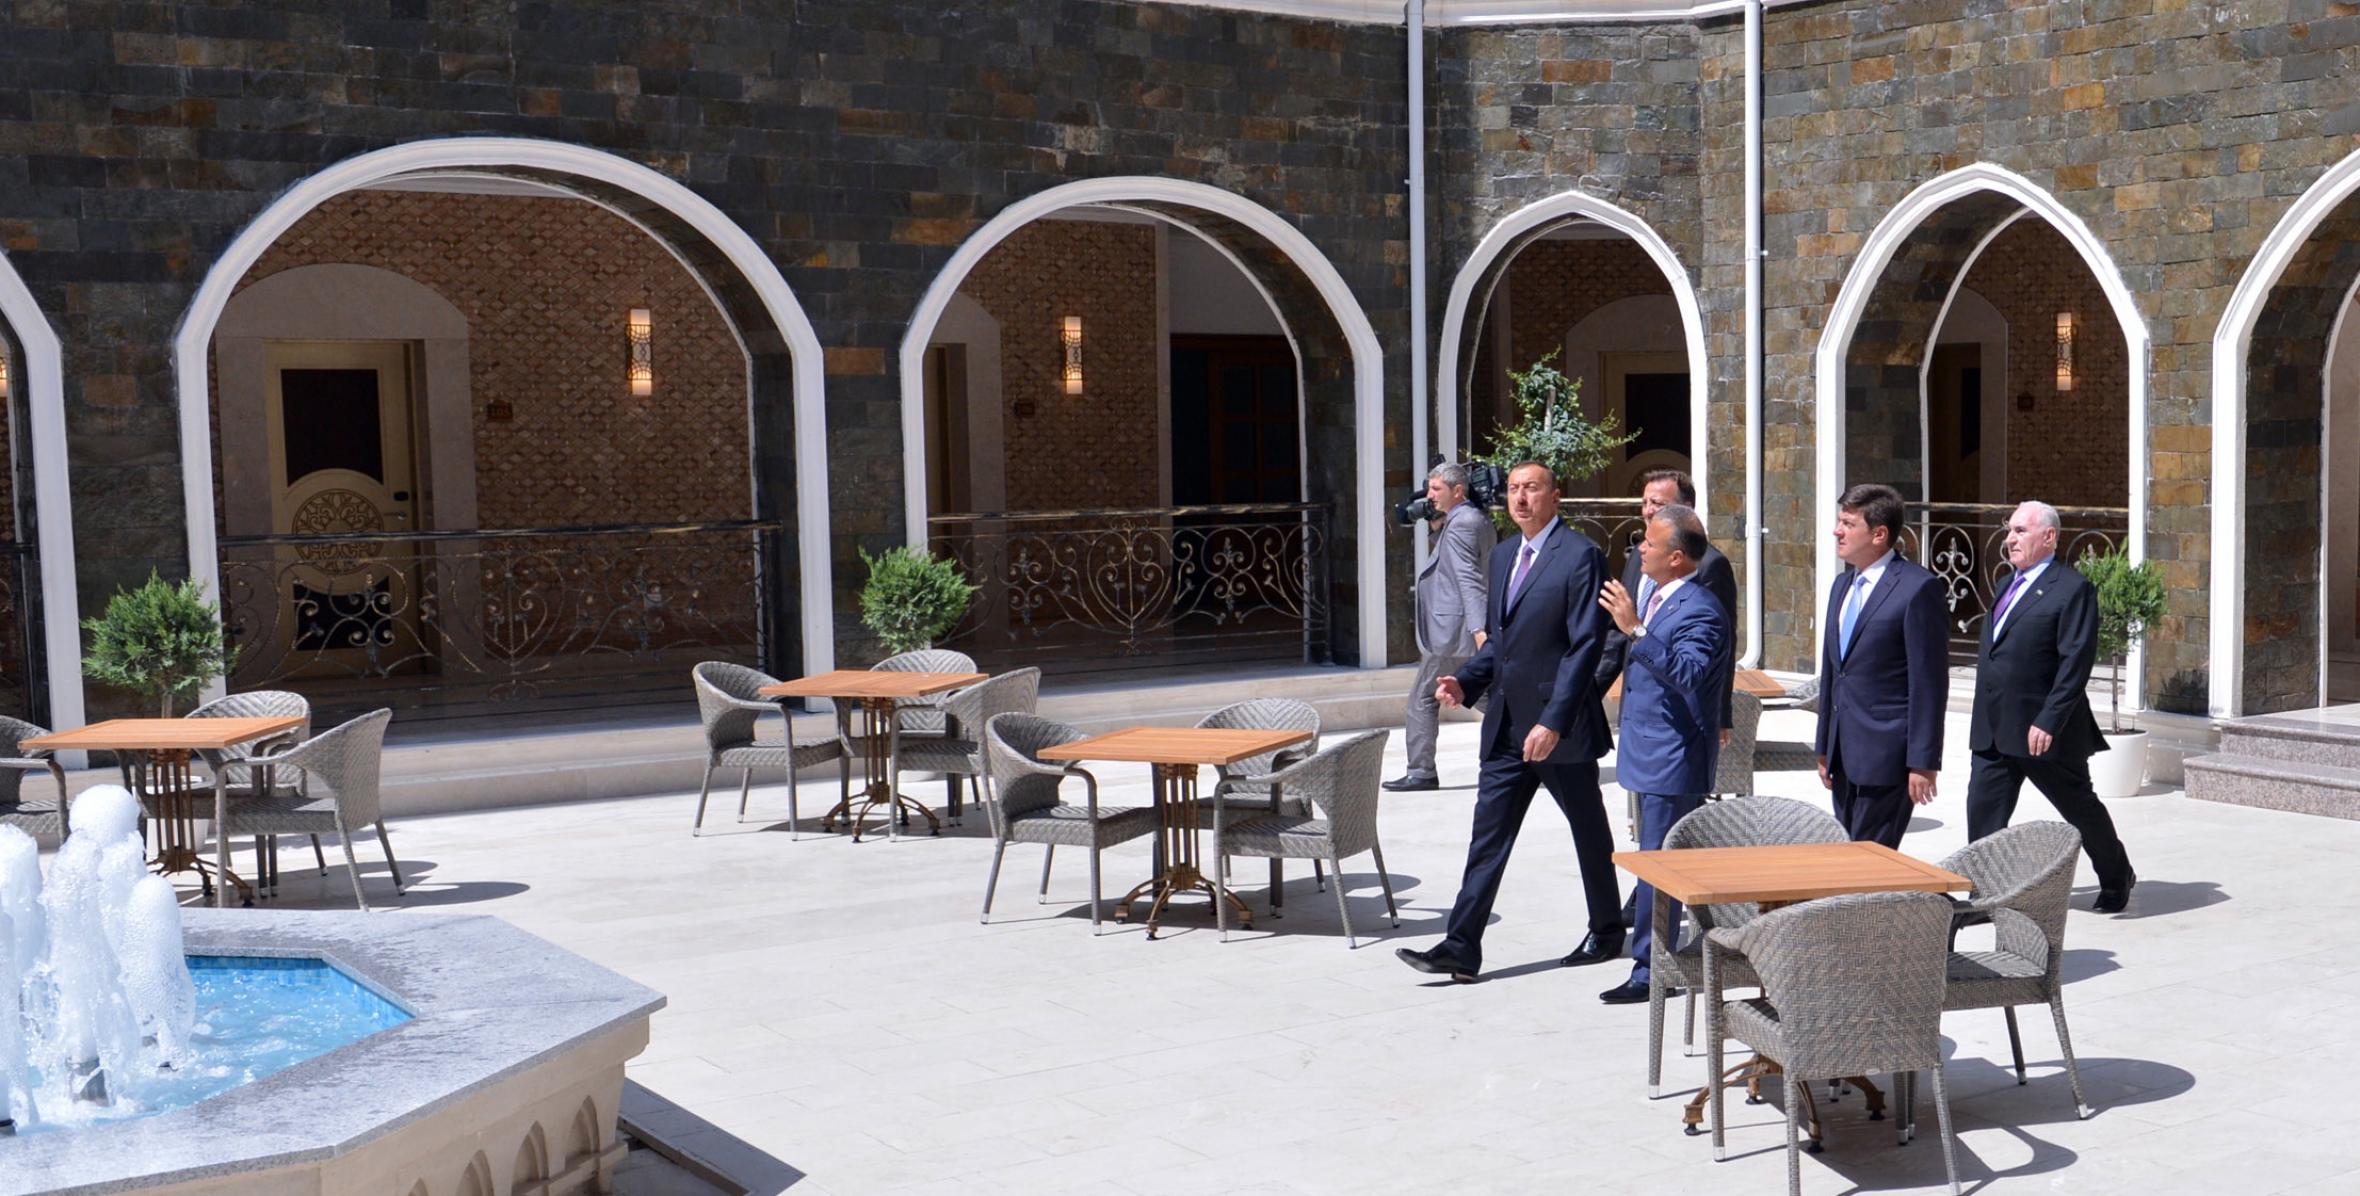 Ilham Aliyev attended the opening of the “Caucasus Caravanserai” hotel complex in Gabala